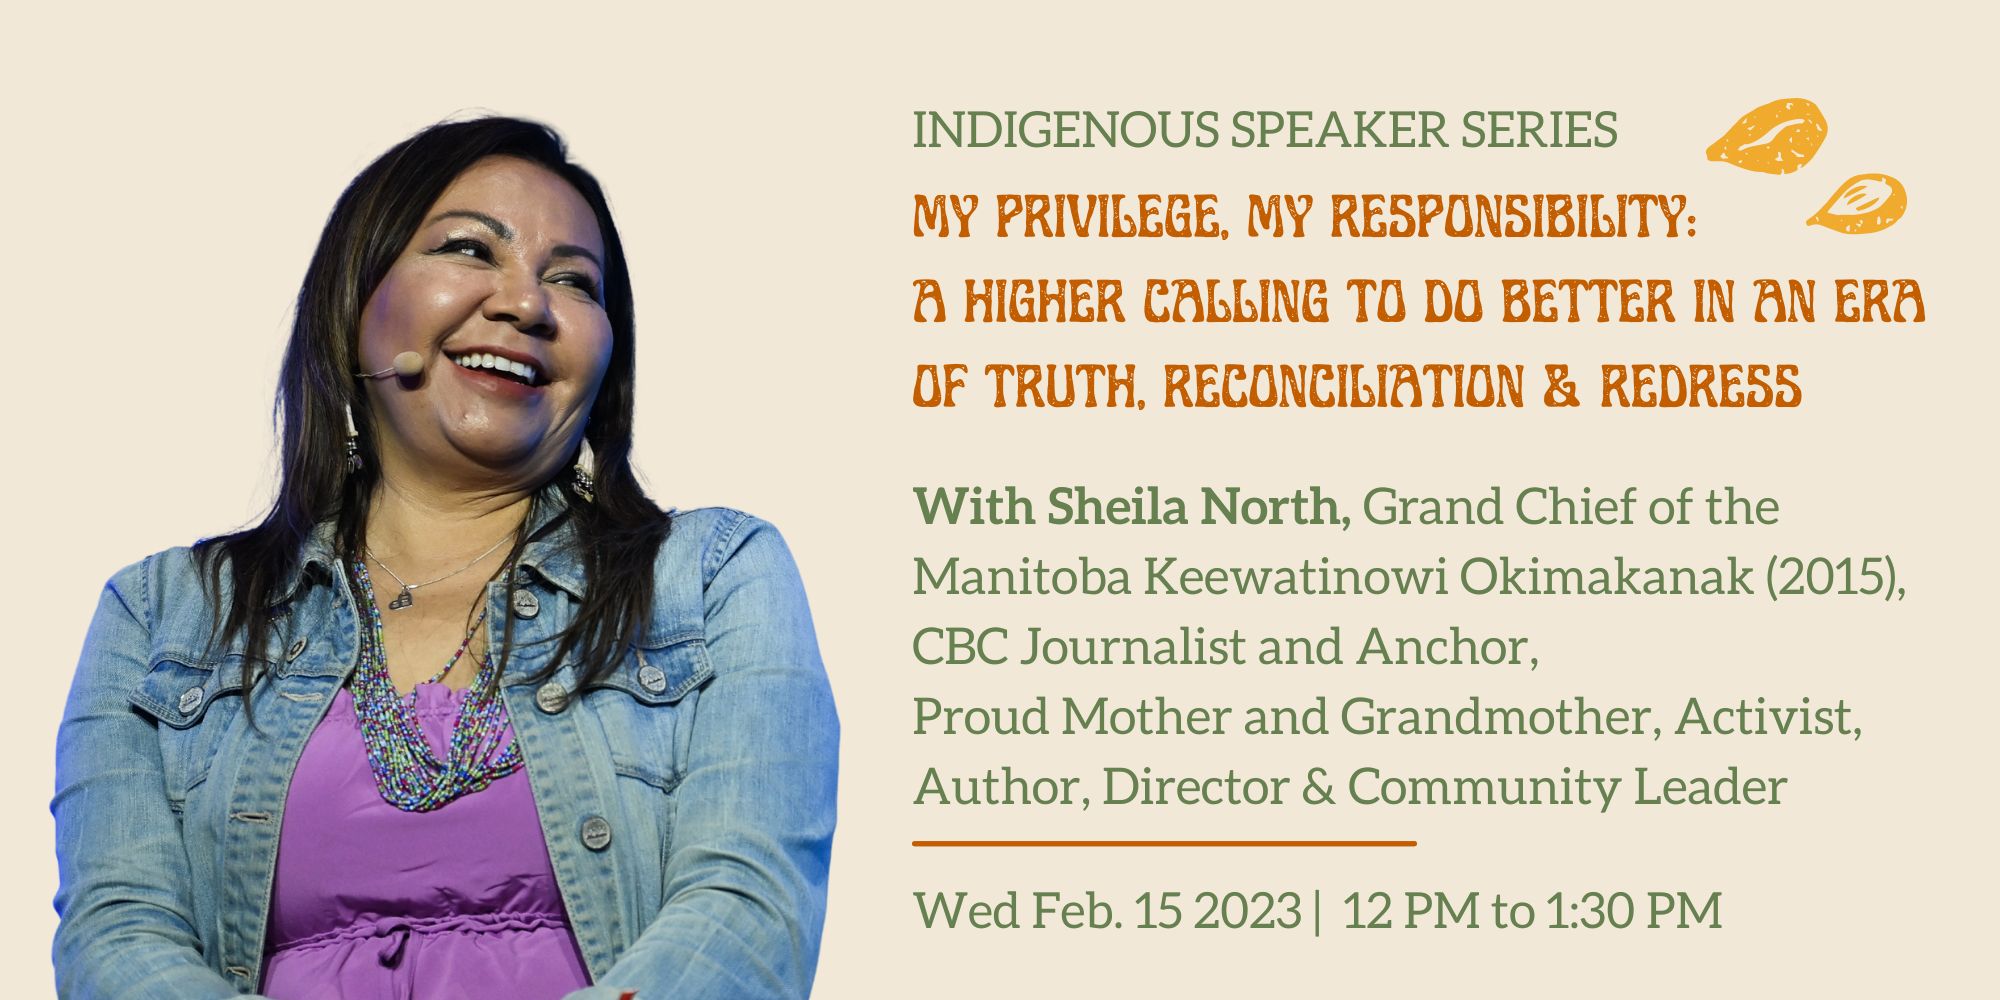 The Faculty of Medicine REDI Office presents: My Privilege, My Responsibility: A Higher Calling To Do Better in an Era of Truth, Reconciliation & Redress with Sheila North